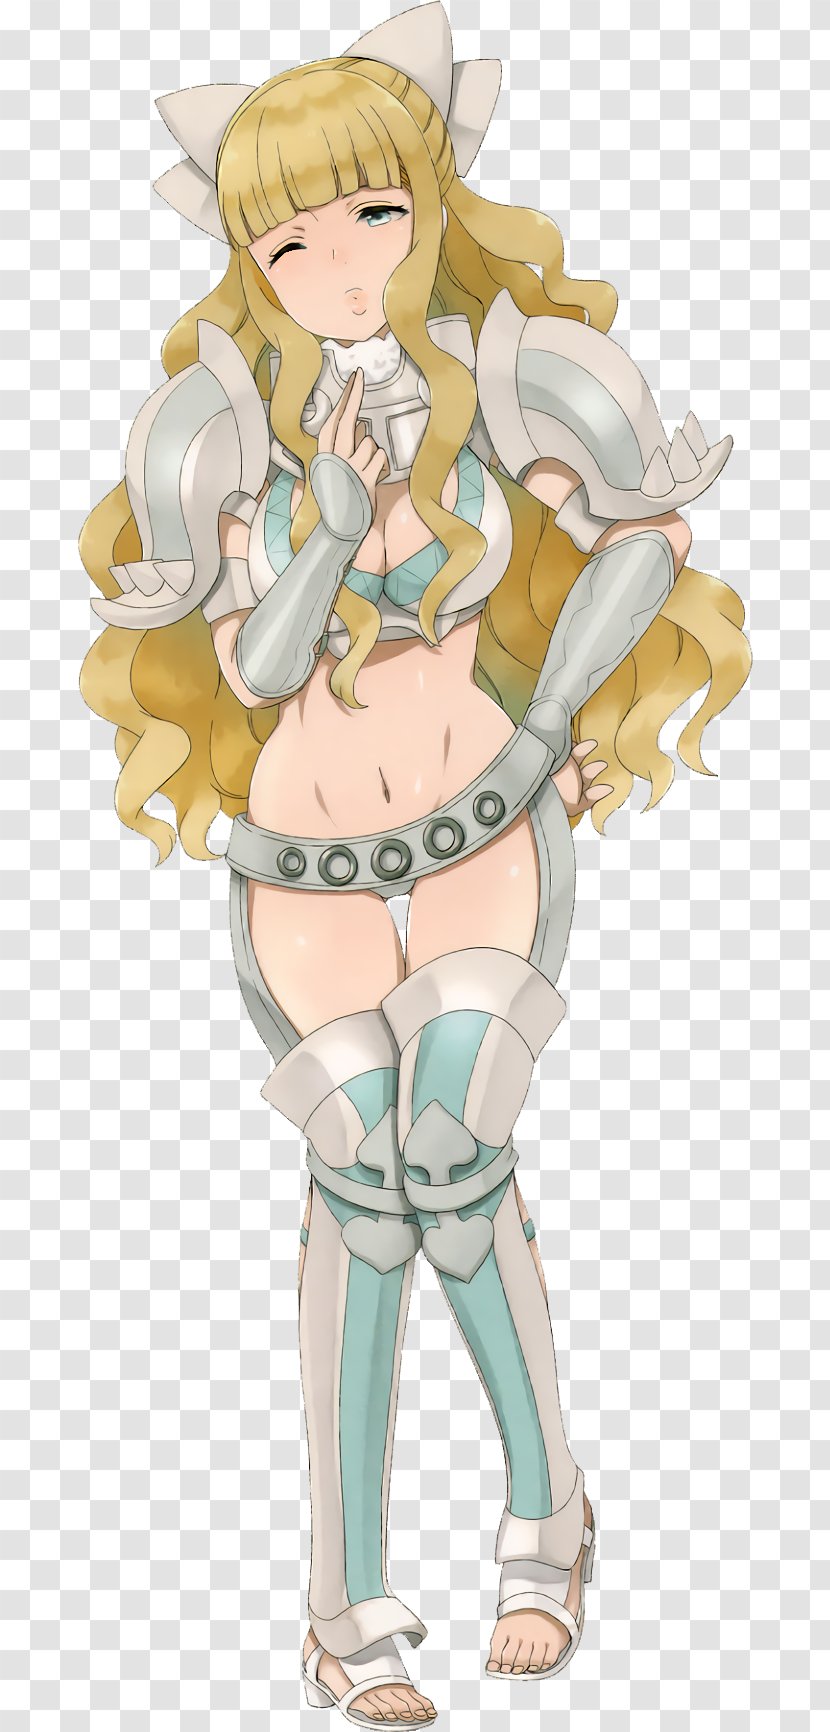 Fire Emblem Fates Awakening Heroes Charlotte Video Game - Tree - Silhouette Transparent PNG